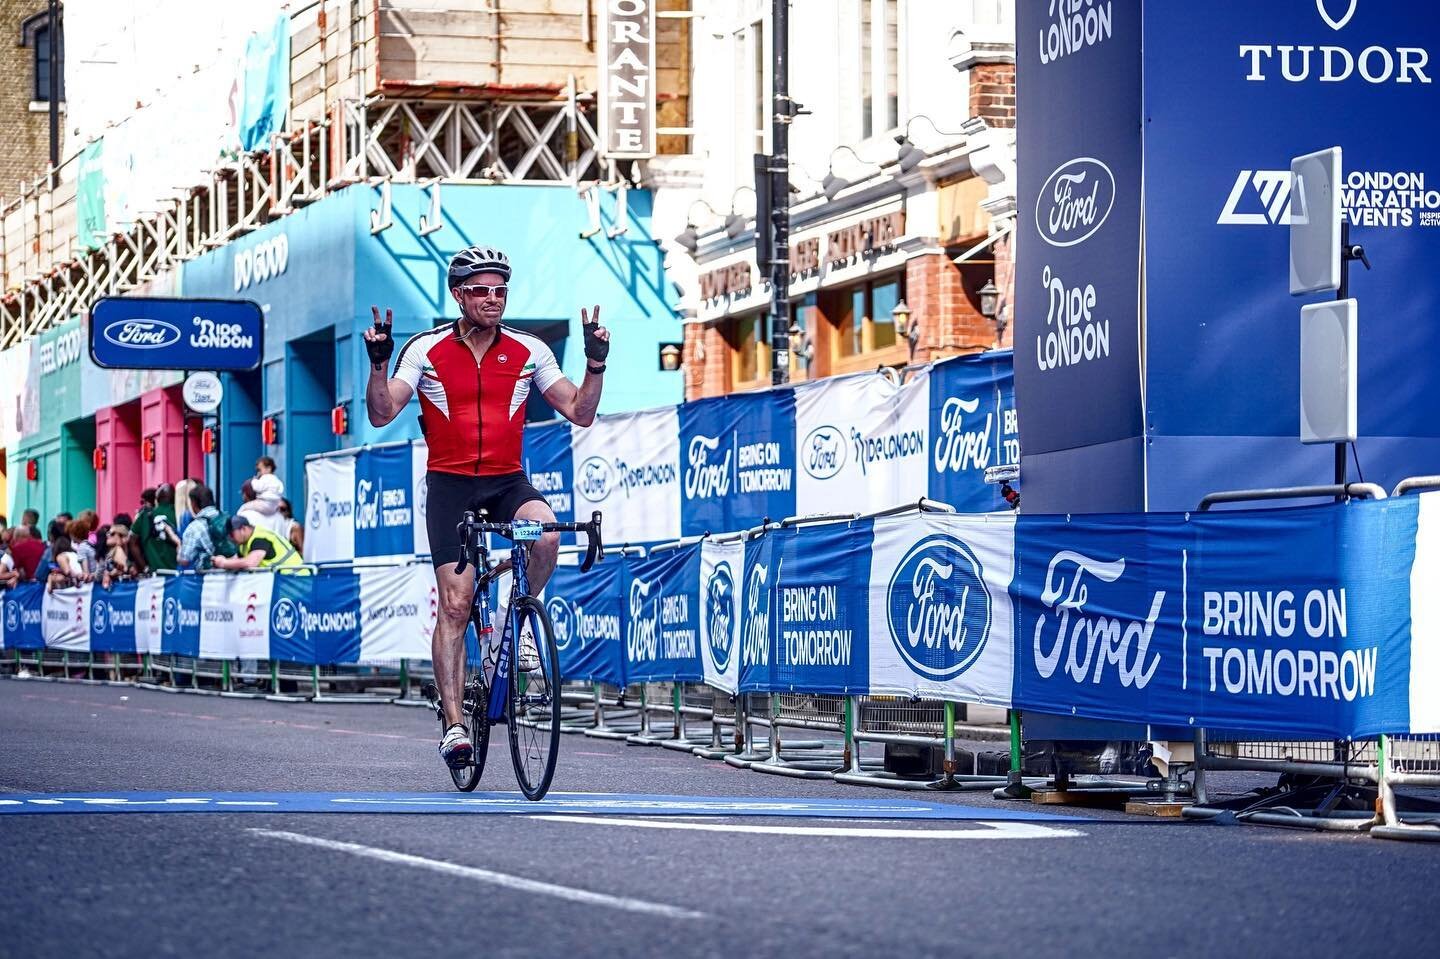 A little delayed but here are the professional photos from RideLondon that Matthew and the @roycolpod team cycled in. 

Don&rsquo;t they look great!

In total, Matthew raised &pound;400 for the charity @10percentfortheocean so thank you for everyone 